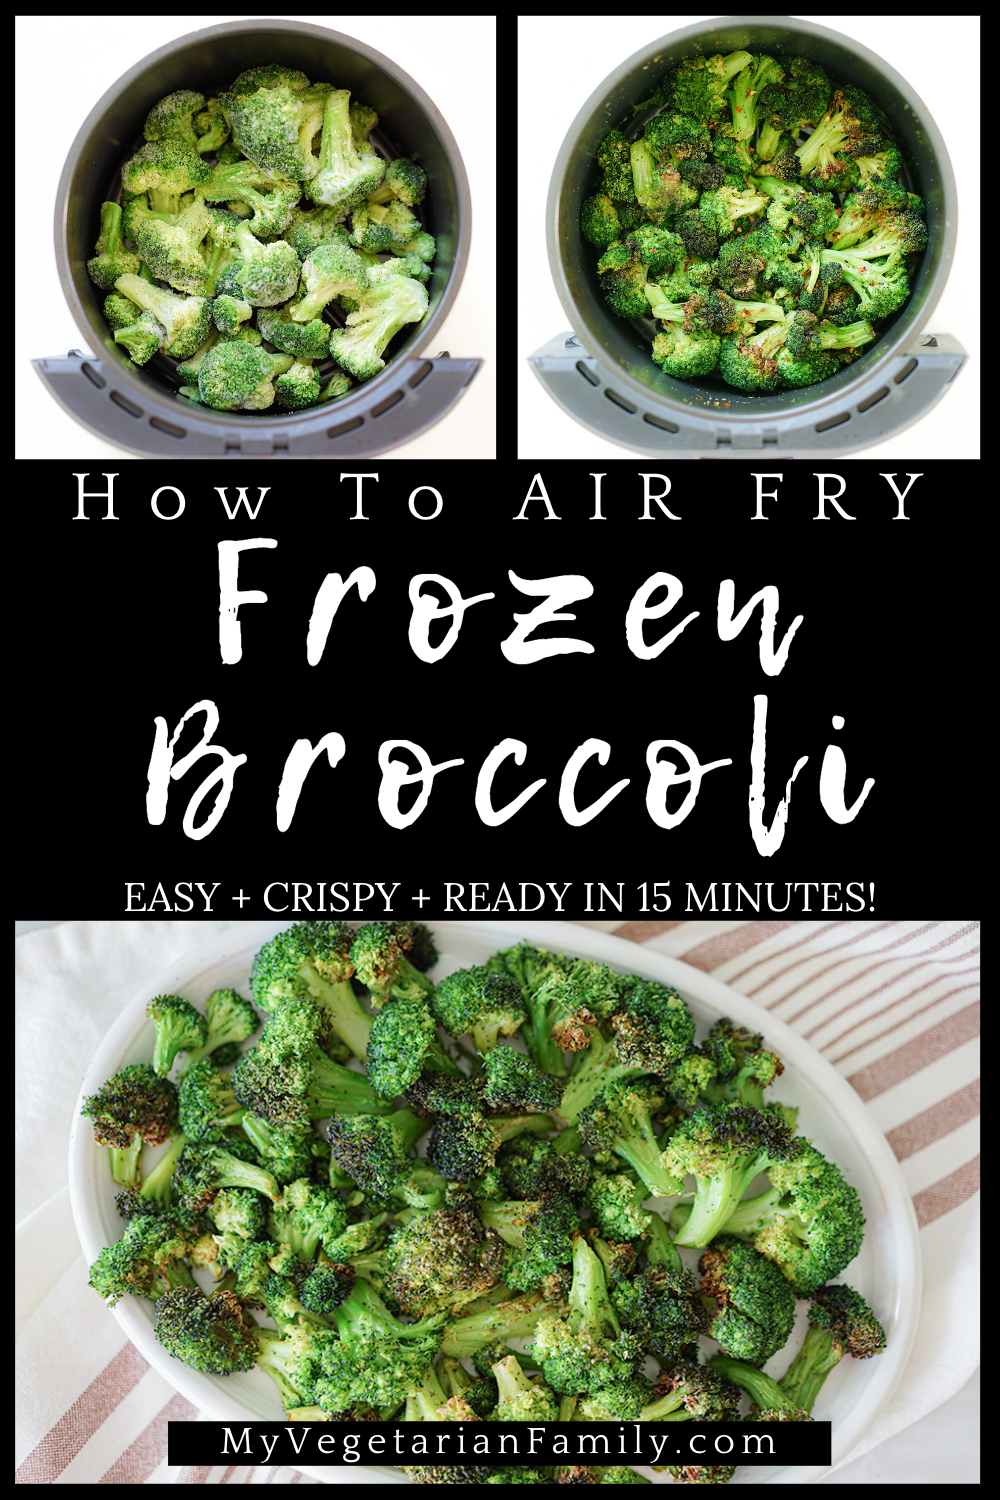 How To Air Fry Frozen Broccoli | My Vegetarian Family #airfryertips #frozenbroccoli